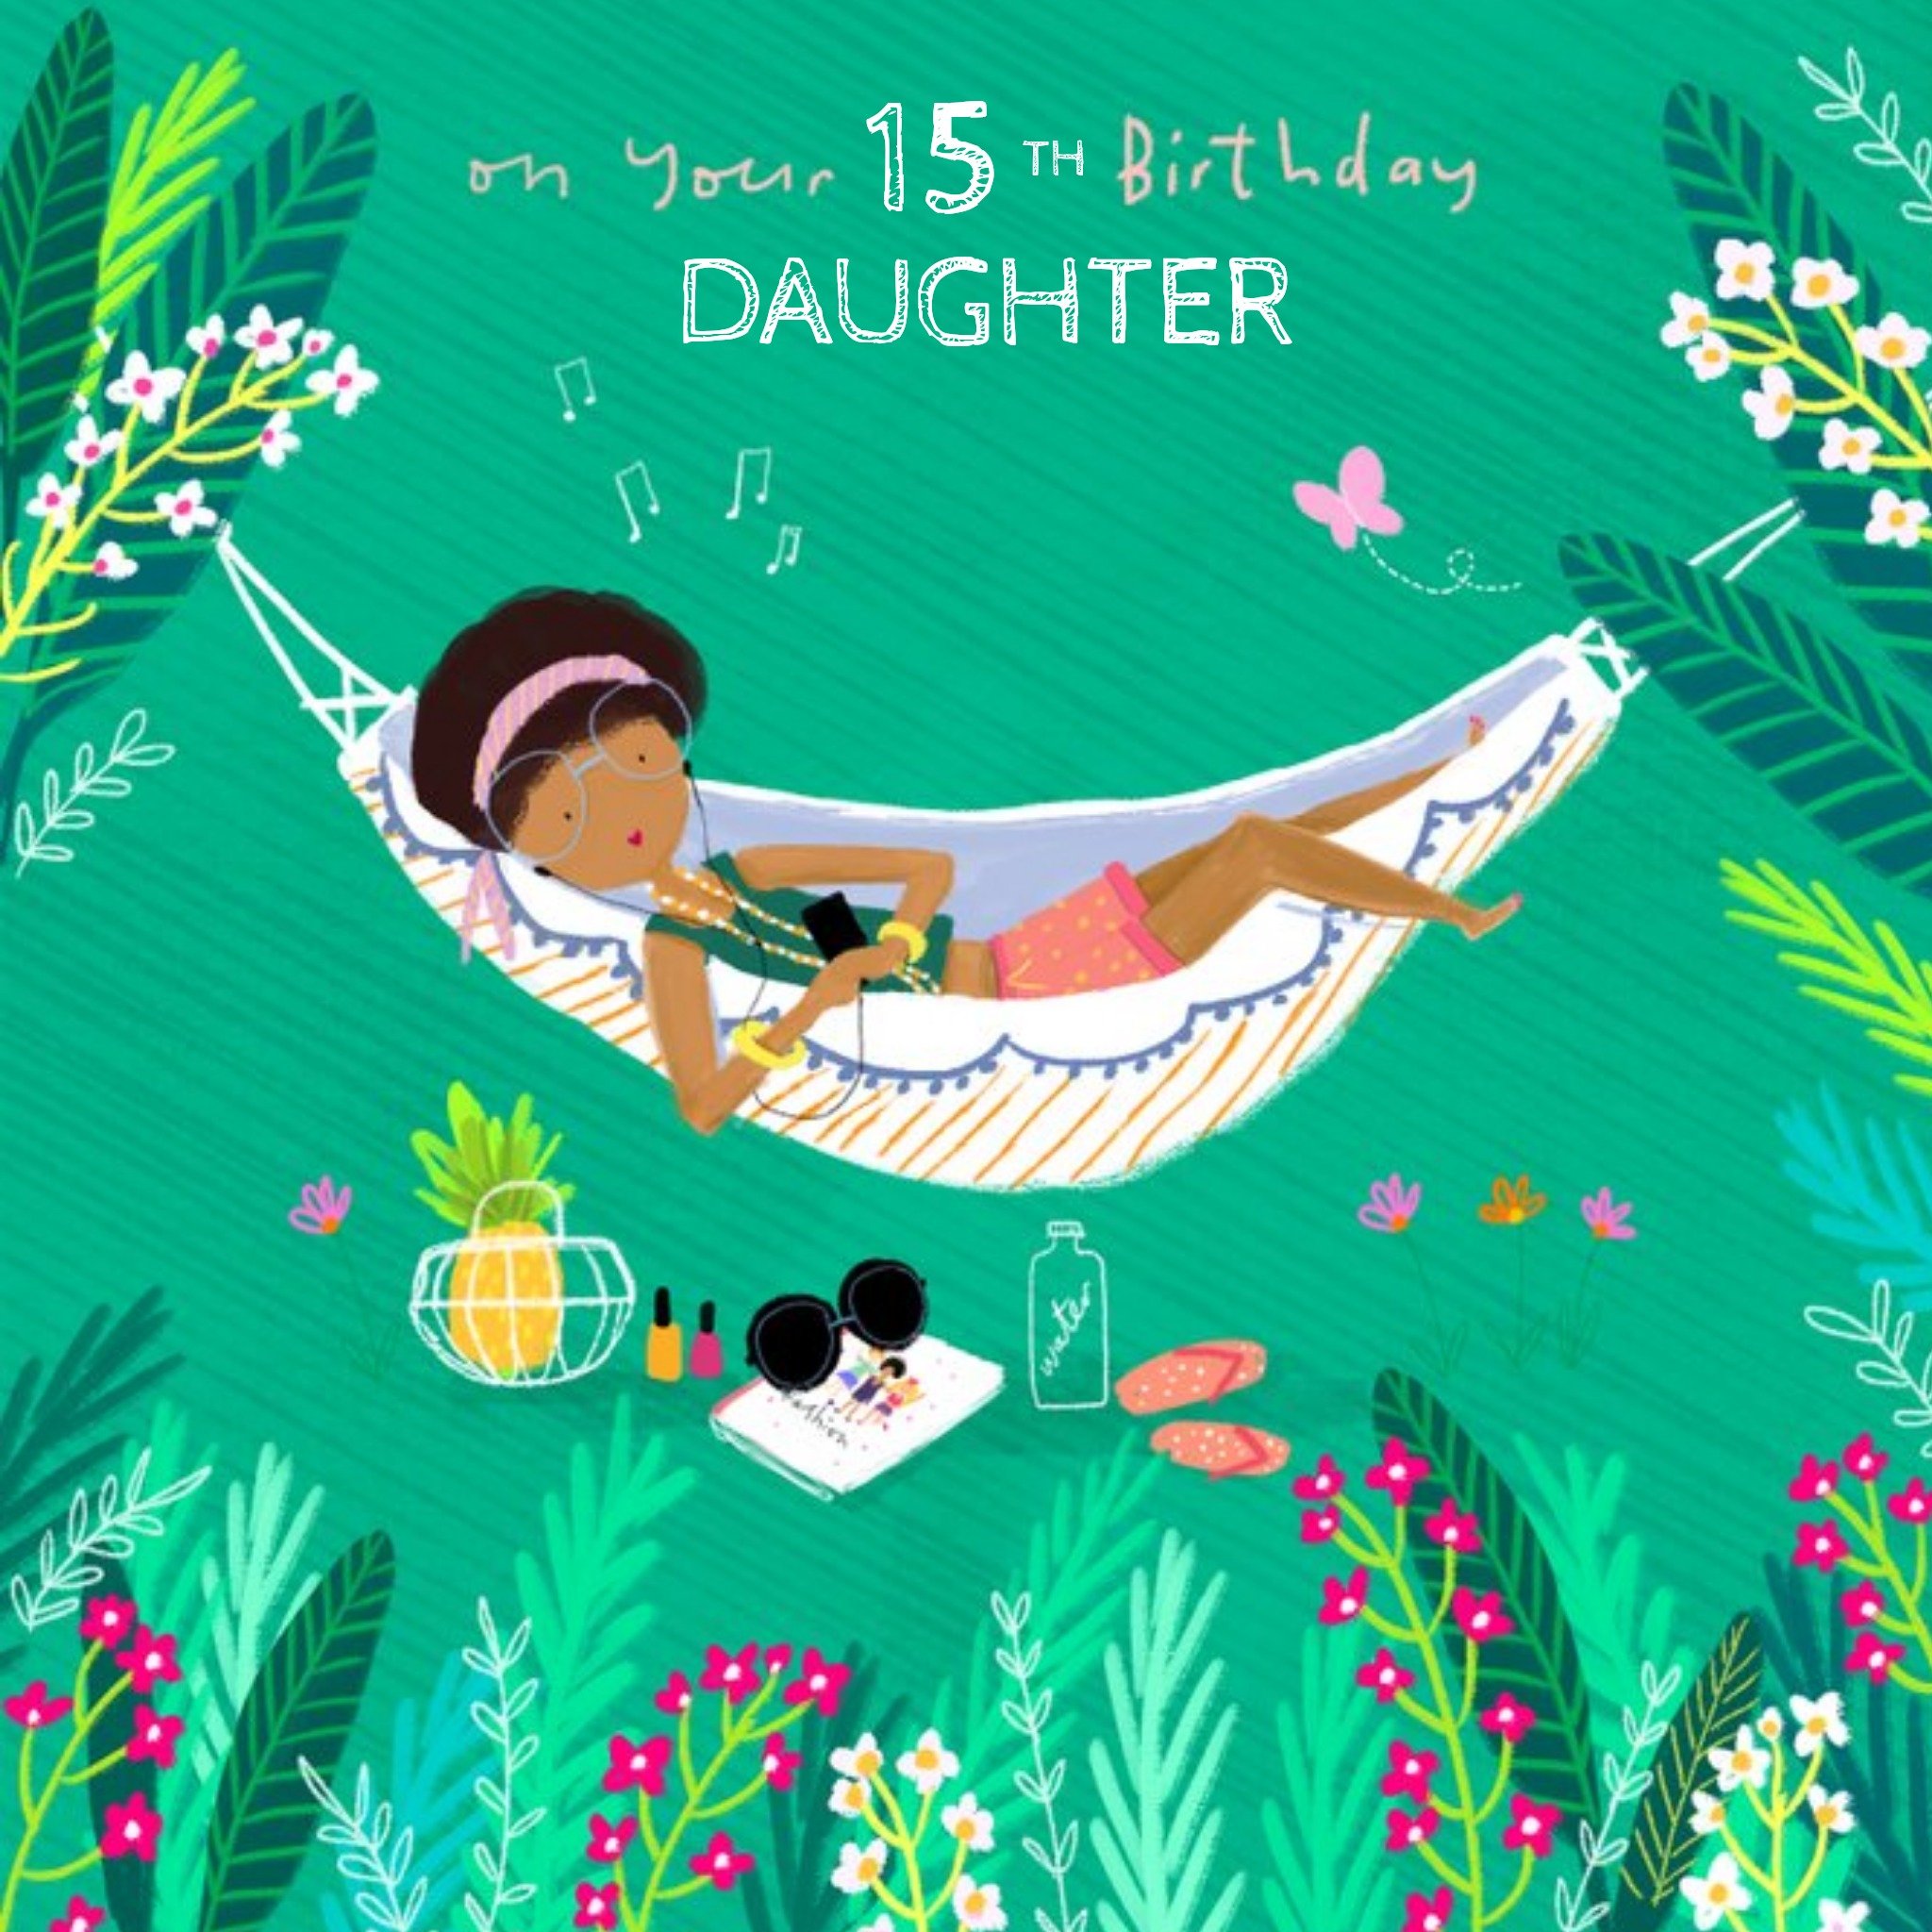 Moonpig On Your Birthday Daughter Illustrated Girl In Hammock Card, Large